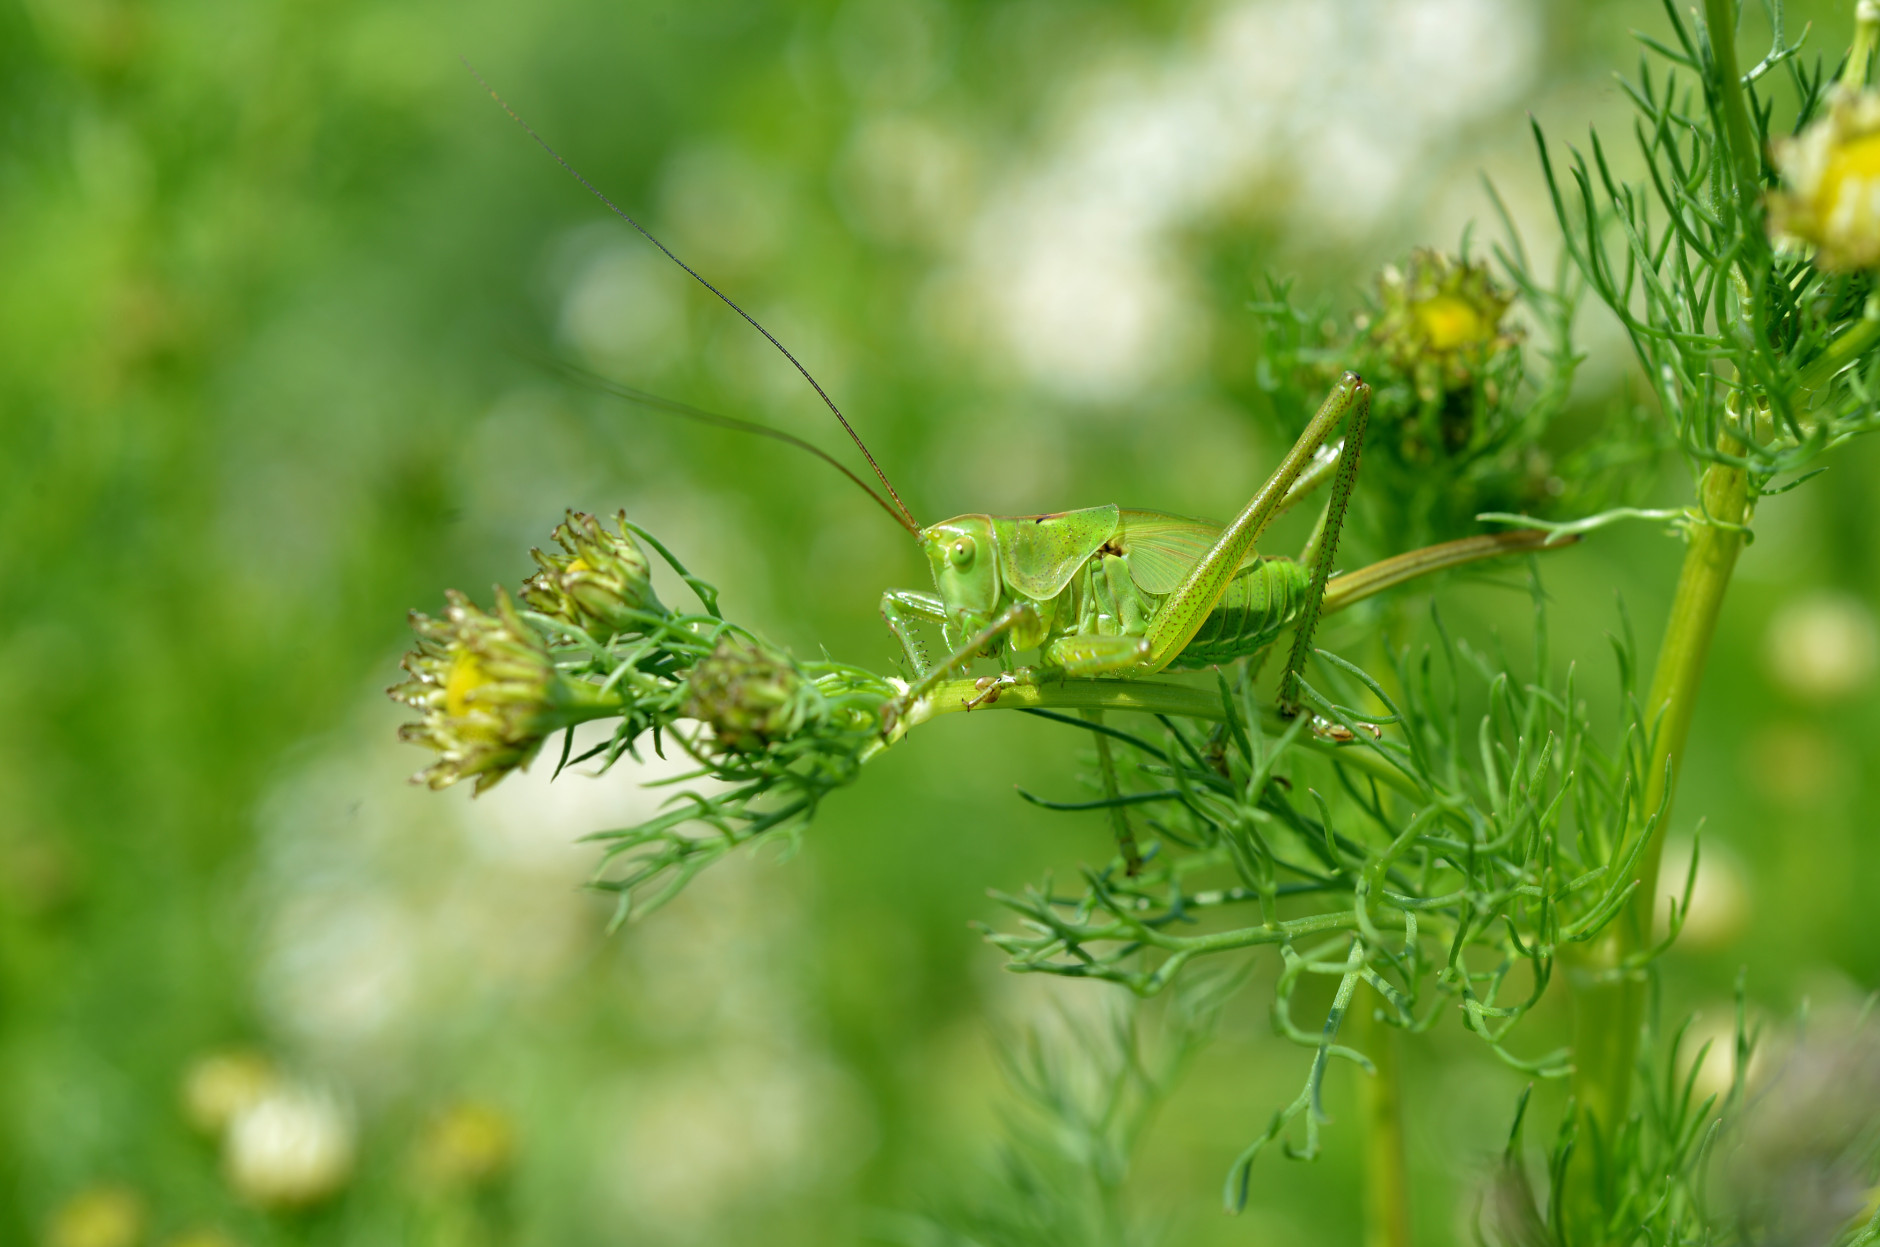 A grasshopper (Gomphocerinae) sits on a branch of a chamomile in Ried im Innkreis, Upper Austria, Friday June 8, 2012. The forecast predicts sunny weather and temperatures up to 32 degrees (89.6 degrees Fahrenheit) in some parts of the country. (AP Photo/Kerstin Joensson)